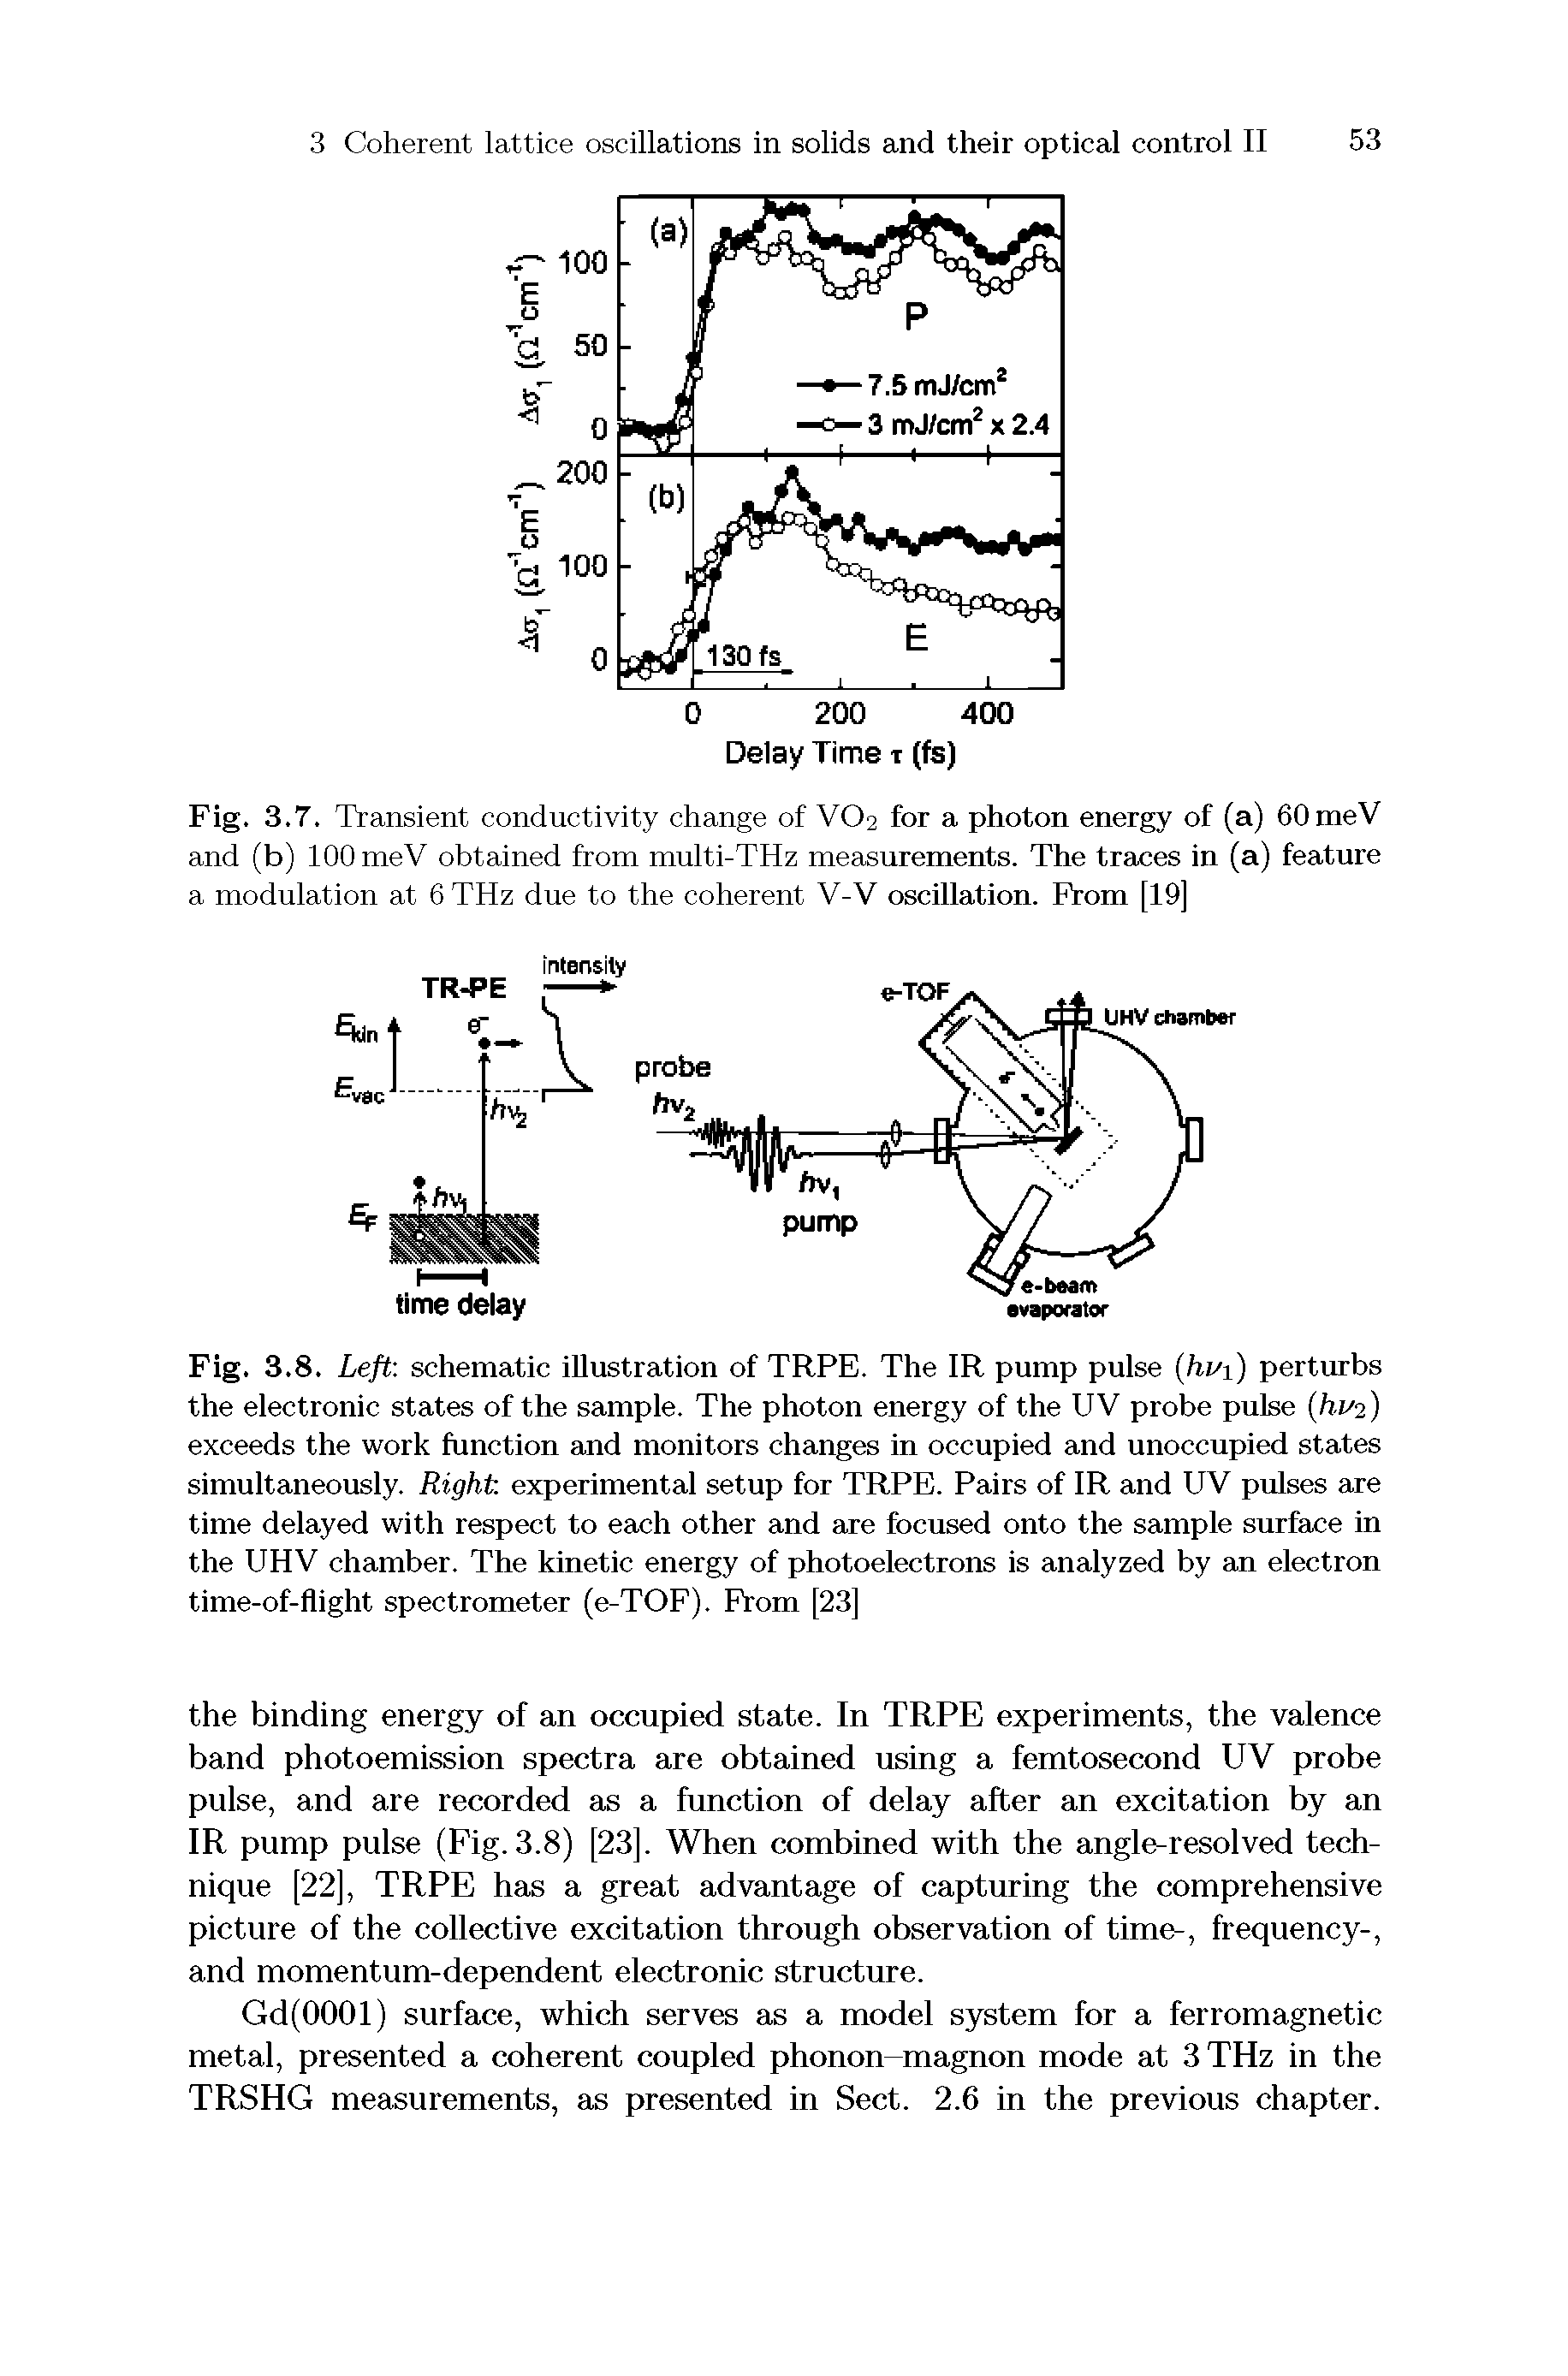 Fig. 3.8. Left schematic illustration of TRPE. The IR pump pulse (hi/1) perturbs the electronic states of the sample. The photon energy of the UV probe pulse (h.1/2) exceeds the work function and monitors changes in occupied and unoccupied states simultaneously. Right experimental setup for TRPE. Pairs of IR and UV pulses are time delayed with respect to each other and are focused onto the sample surface in the UHV chamber. The kinetic energy of photoelectrons is analyzed by an electron time-of-flight spectrometer (e-TOF). From [23]...